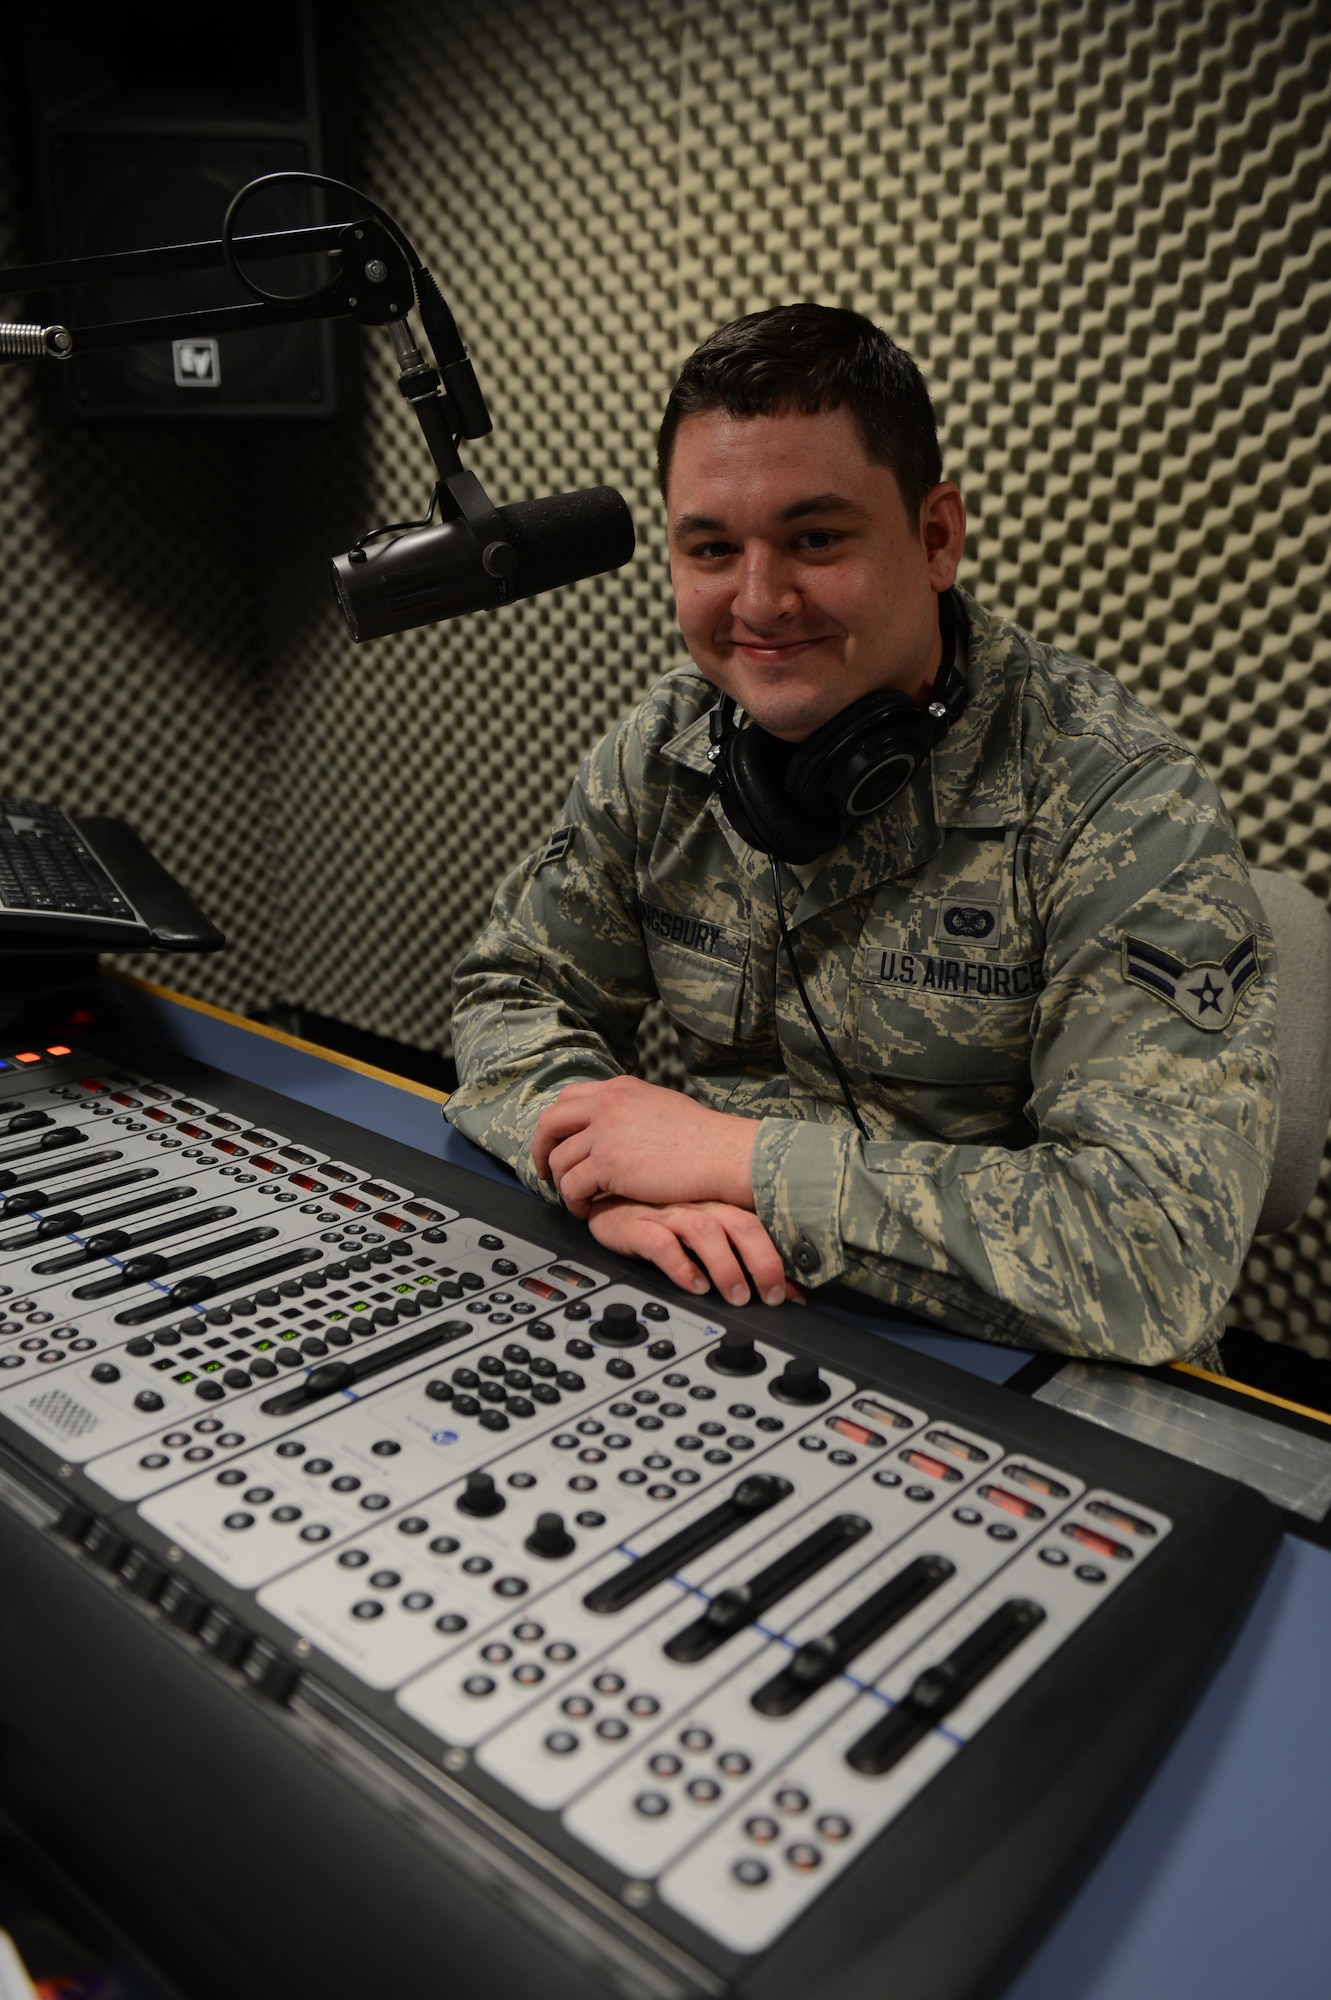 SPANGDAHLEM AIR BASE, Germany – U.S. Air Force Airman 1st Class Corey Kingsbury, American Forces Network Spangdahlem broadcast producer, is the Super Saber Performer for the week of April 18-24. (U.S. Air Force photo by Airman 1st Class Gustavo Castillo/Released)